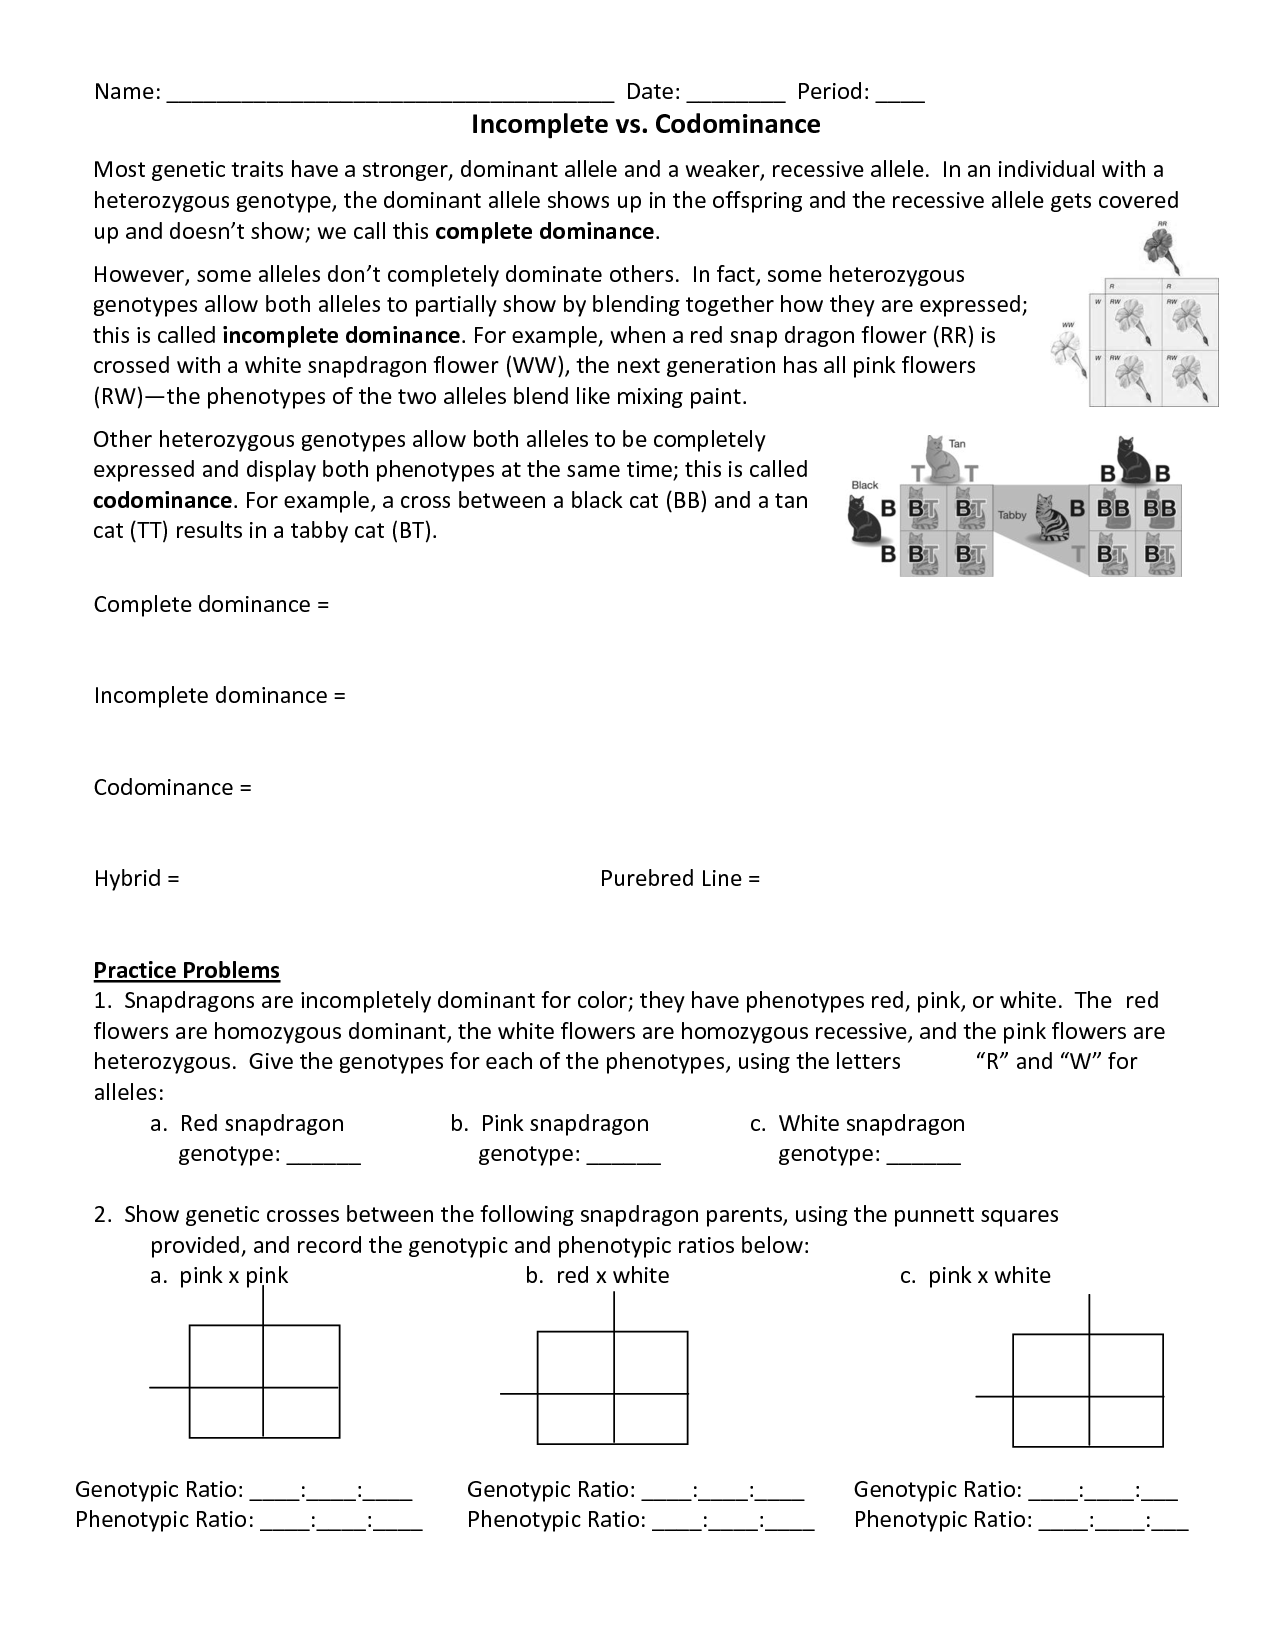 16-best-images-of-incomplete-and-codominance-worksheet-answers-incomplete-and-codominance